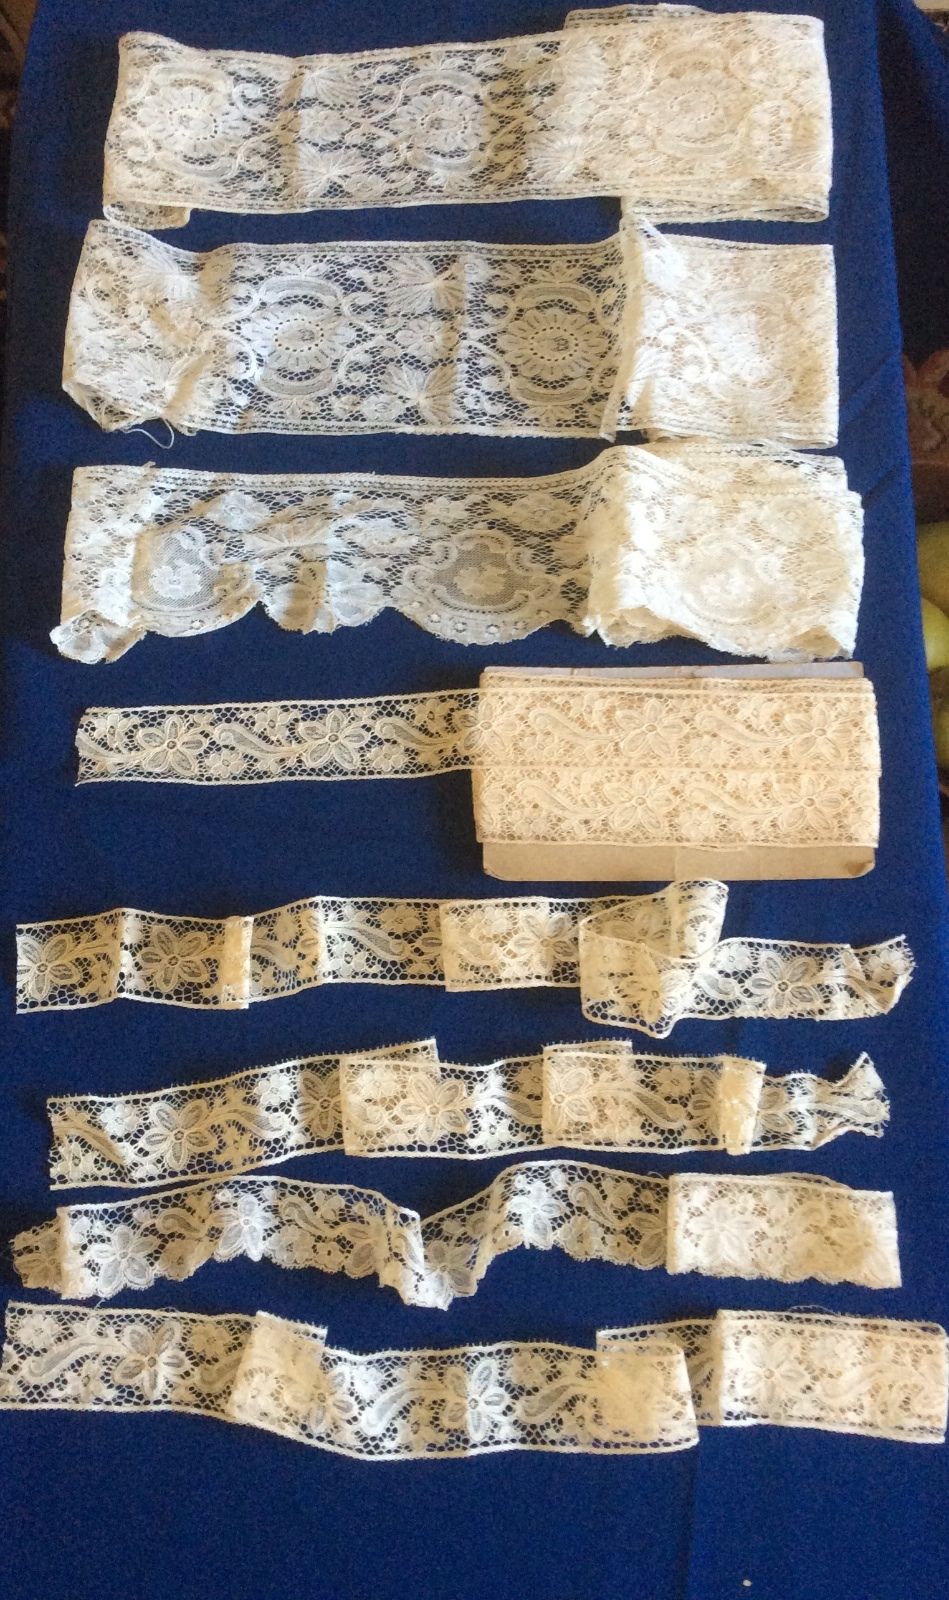 Yards of Vintage Valenciennes Lace Trim and Edging*Gorgeous !